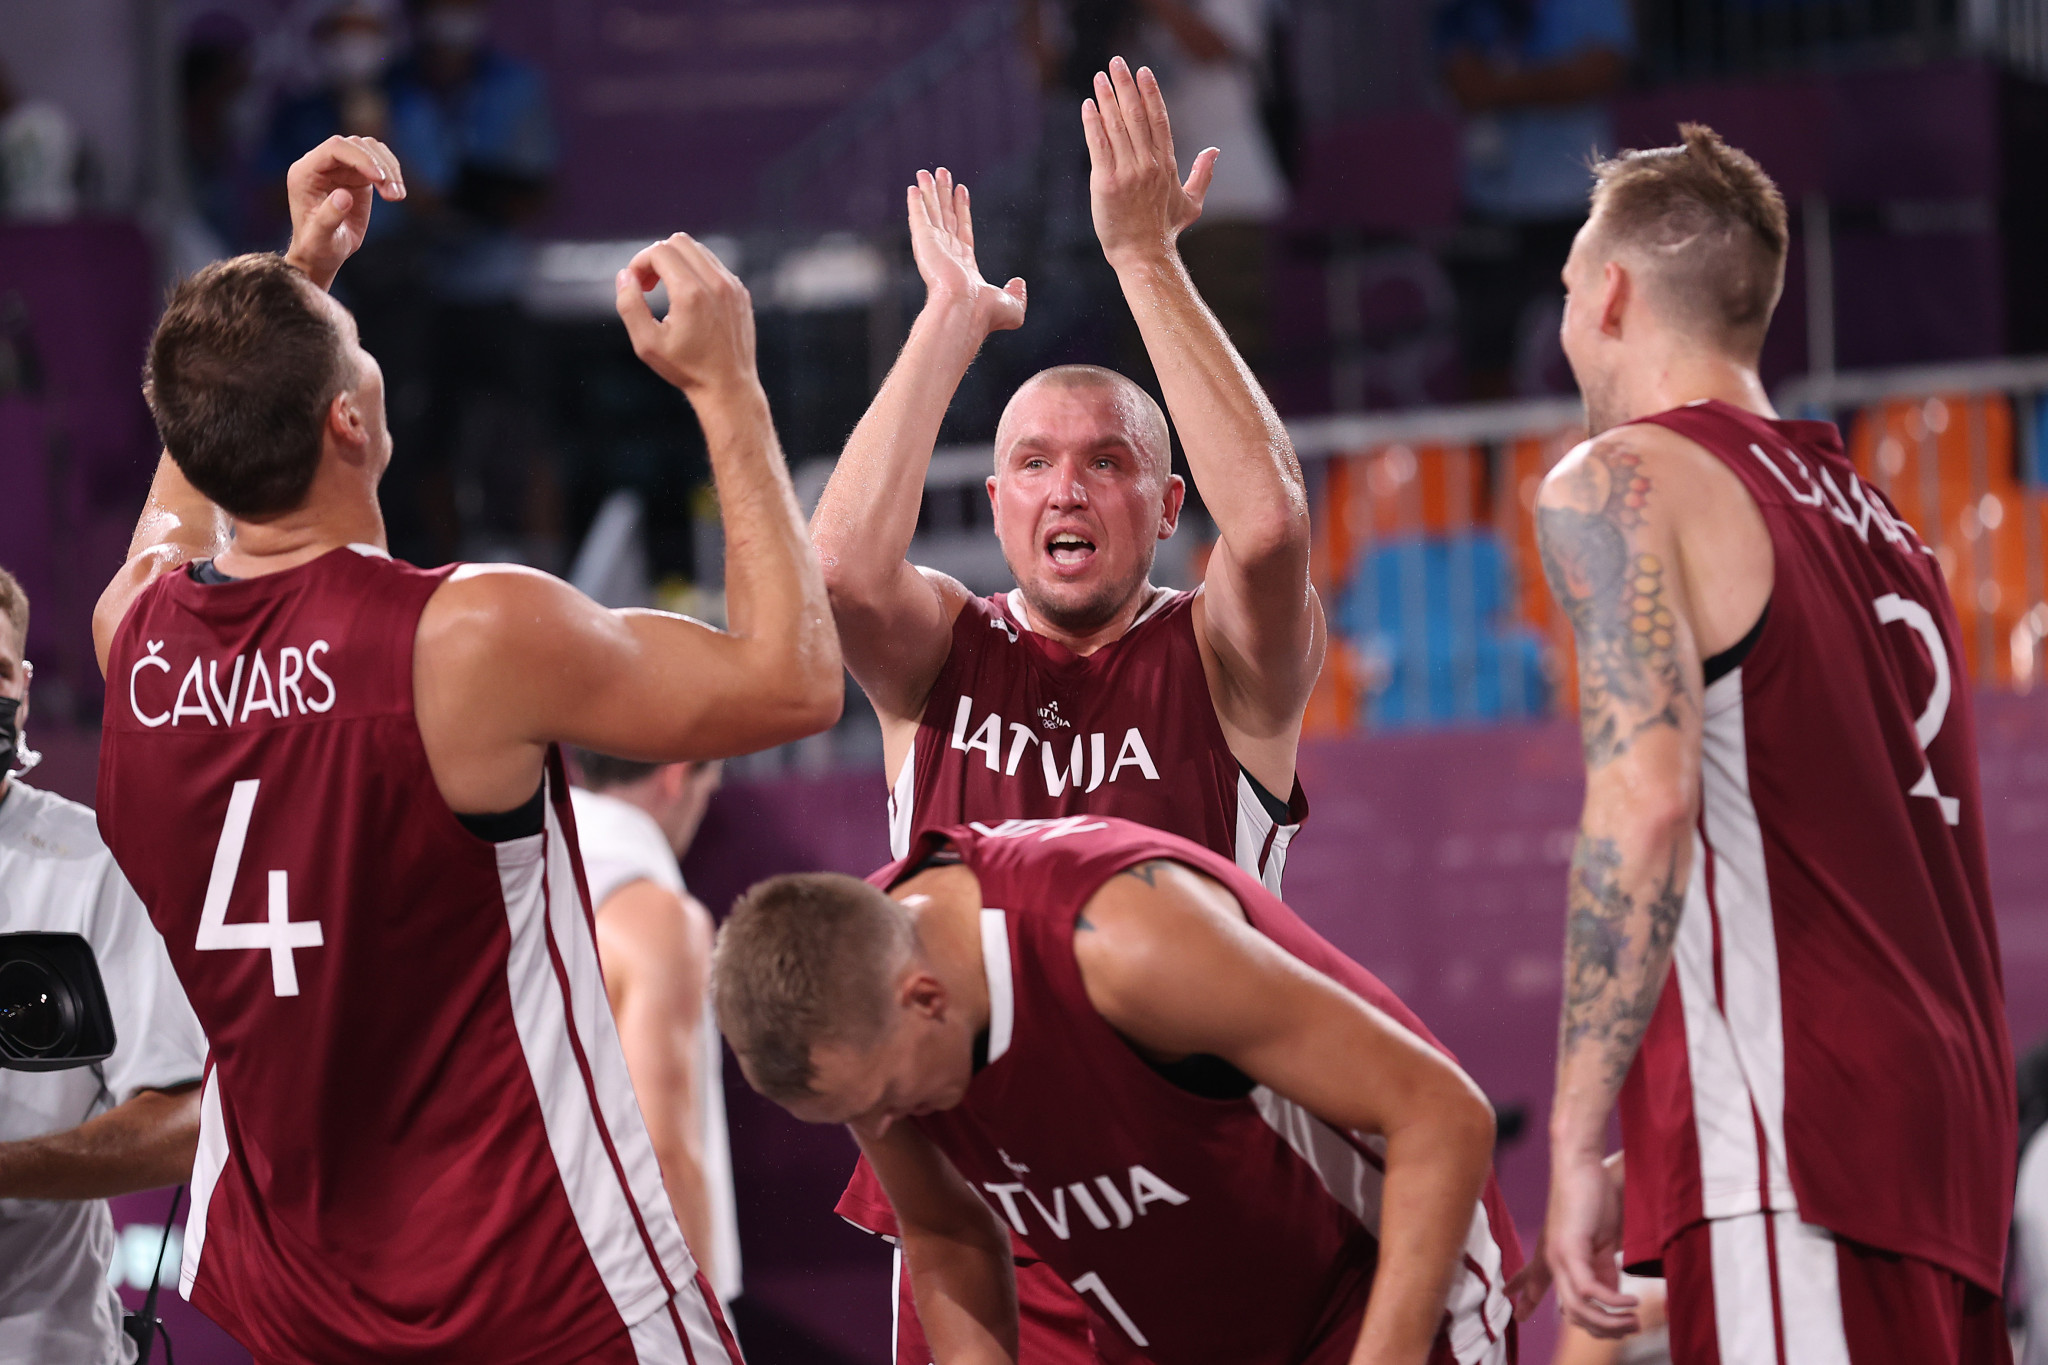 The quartet that won gold for Latvia at the Tokyo 2020 Olympics are set to represent Riga on the 3x3 World Tour in Montreal ©Getty Images